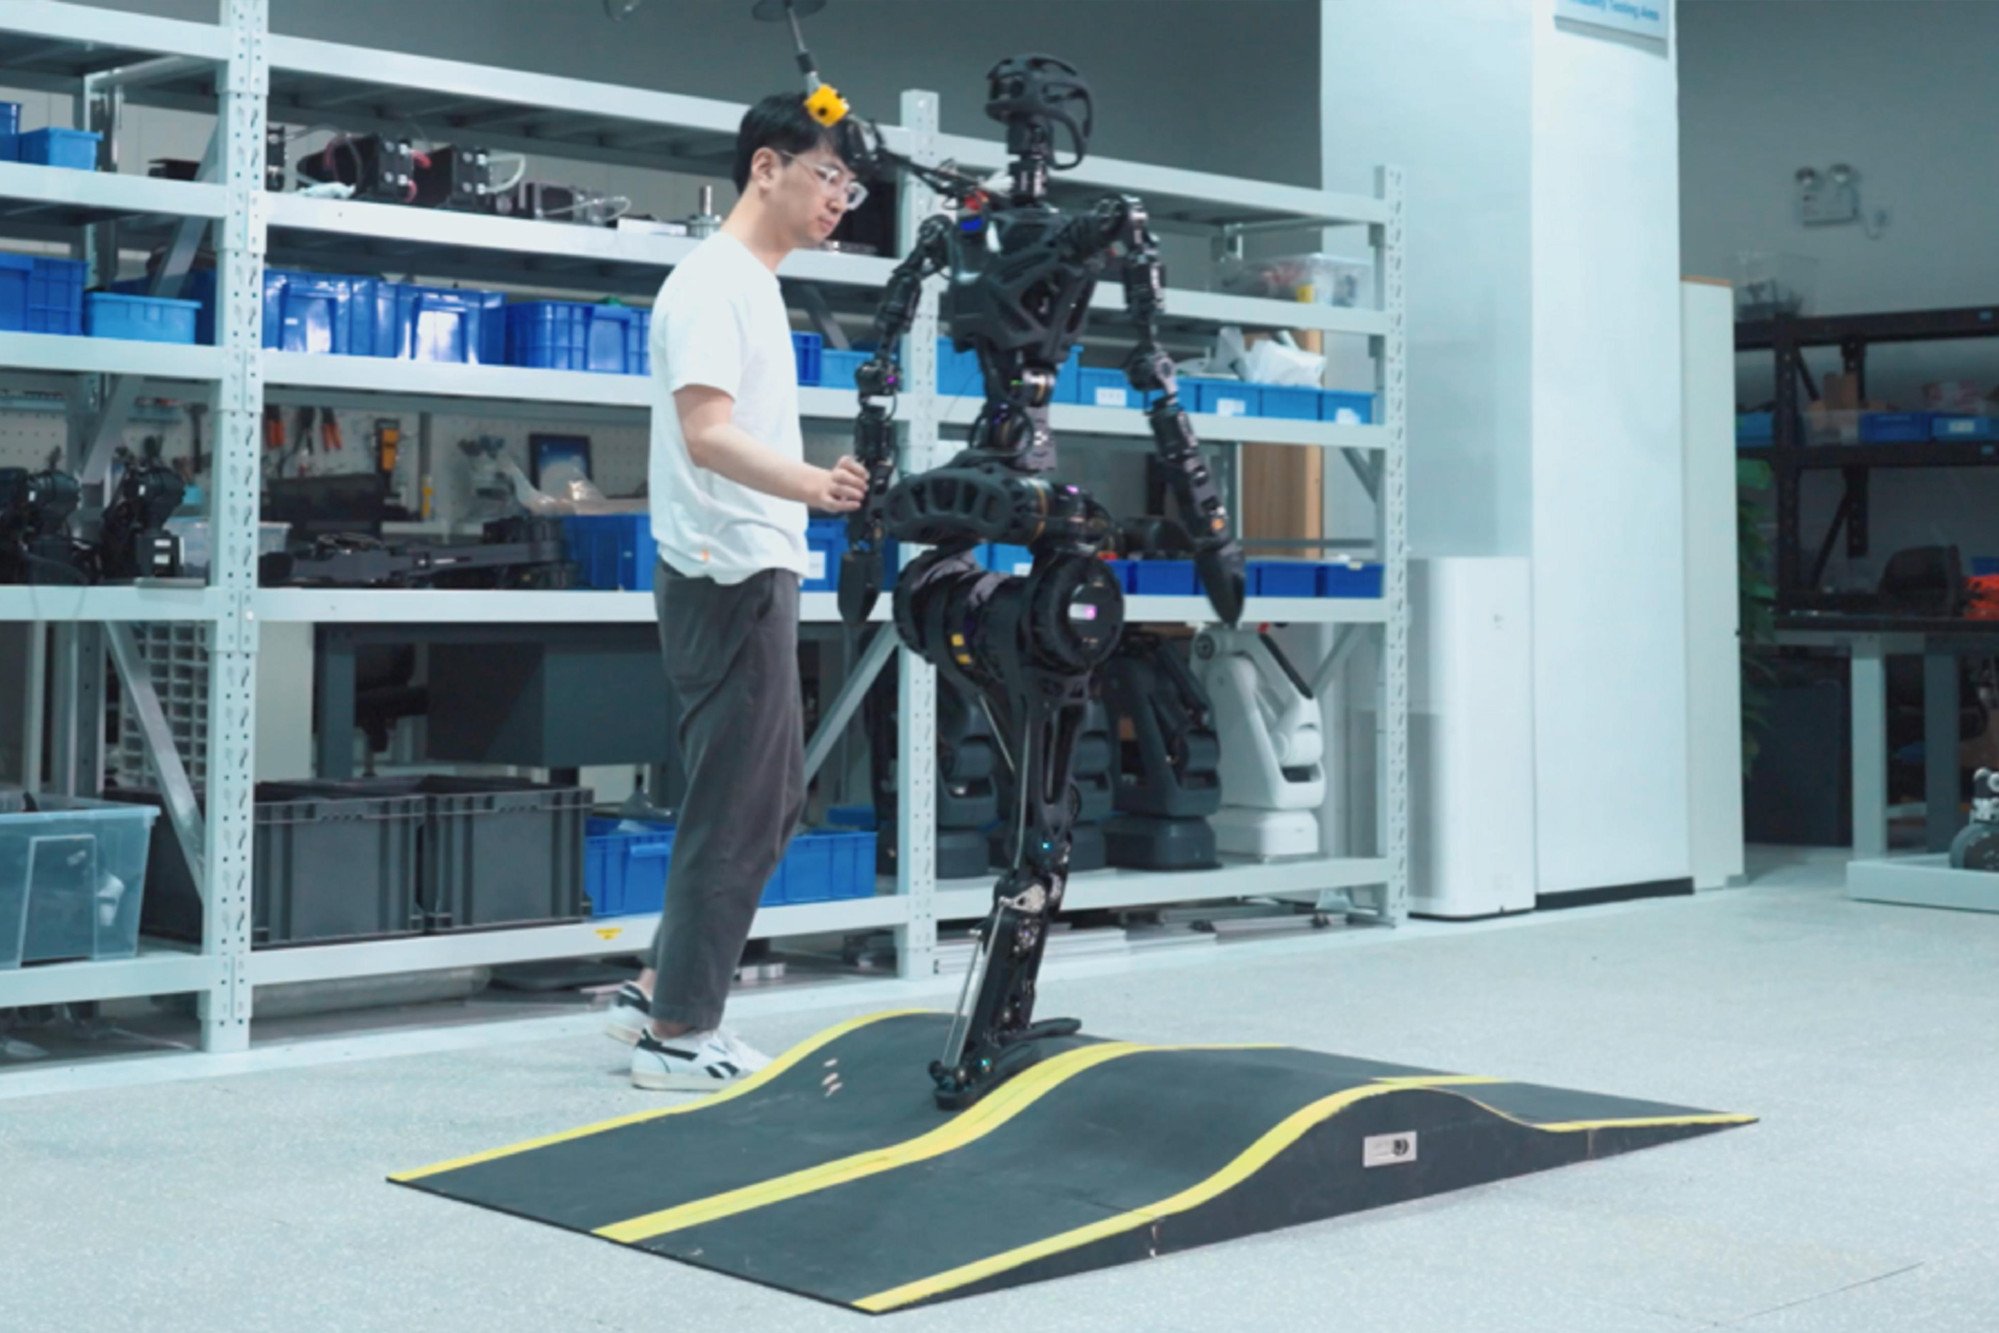 A Fourier Intelligence engineer tests the self-balancing ability of the company’s humanoid robot. Photo: Handout